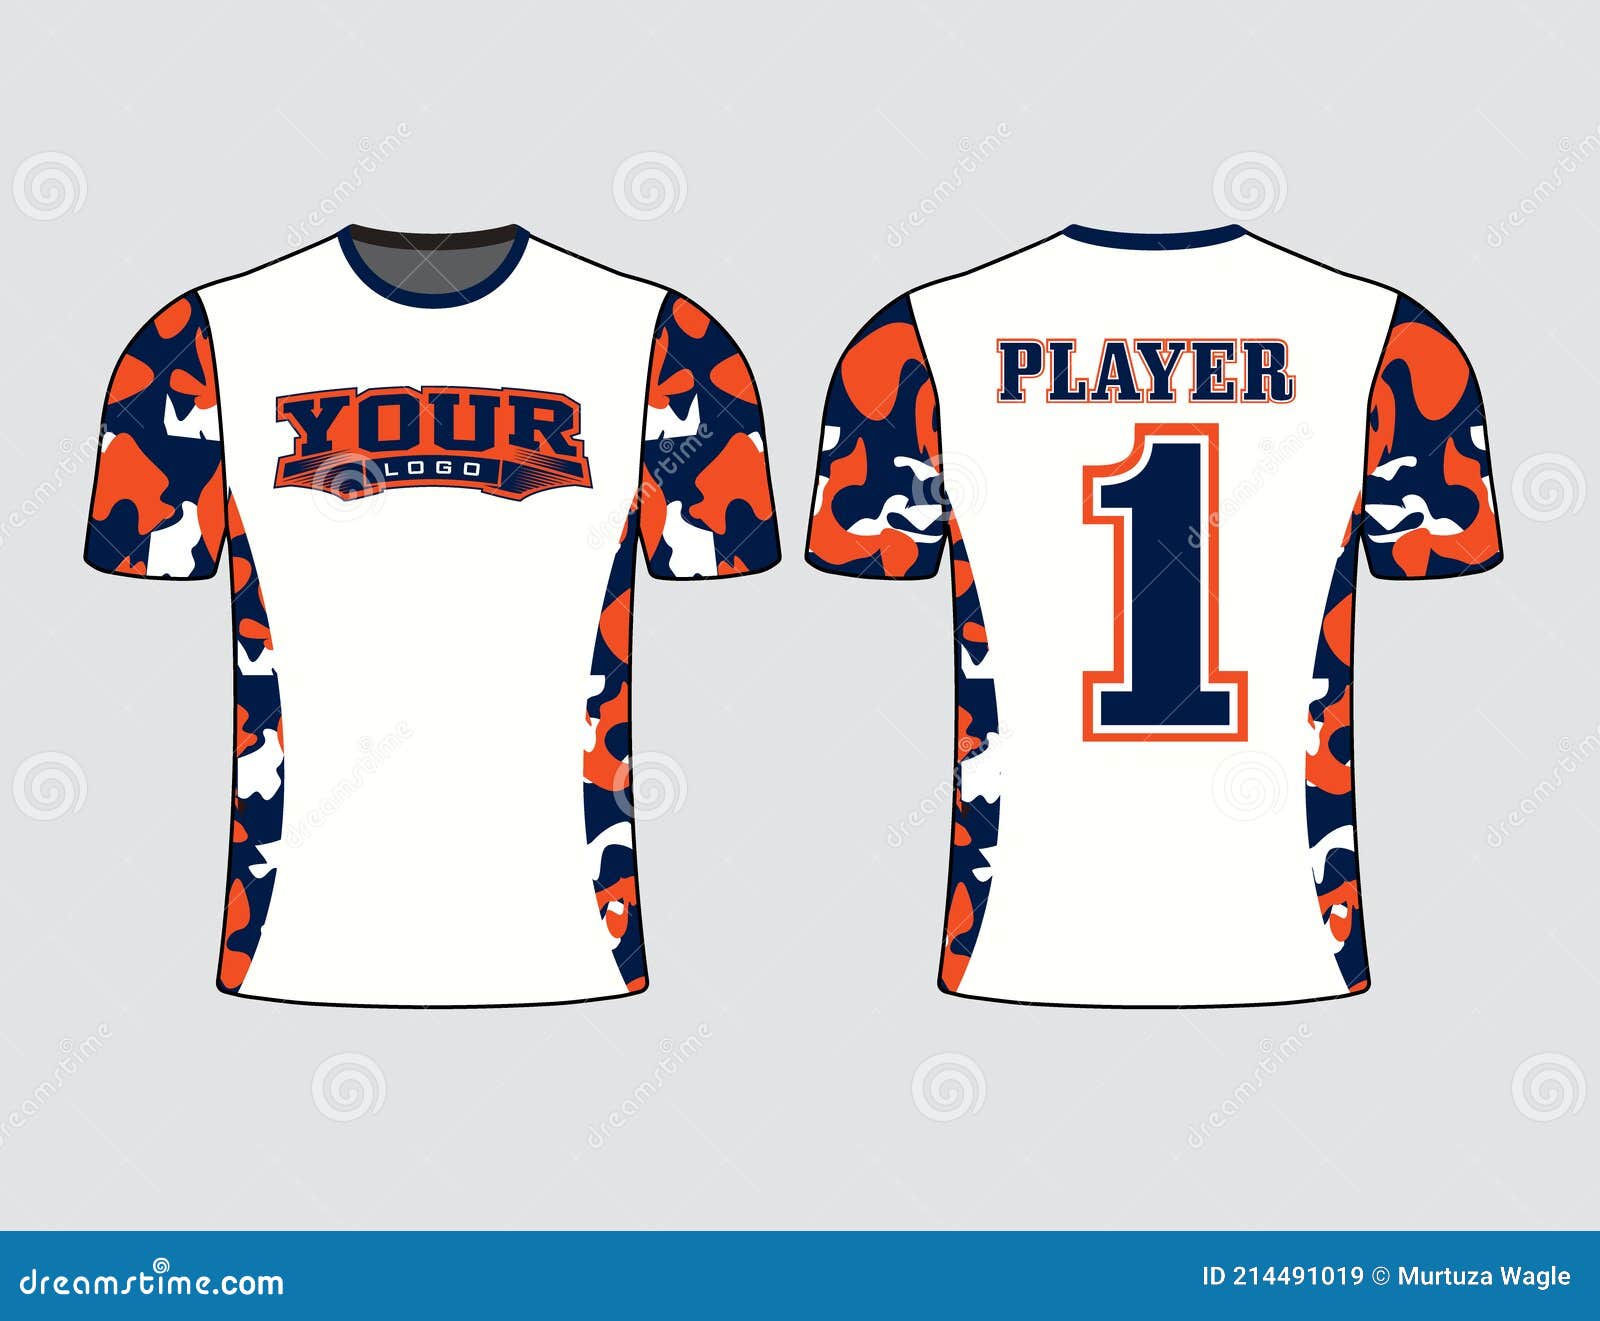 All Sports Player Jersey Design with Elegant Edgy and Wild Look Stock ...